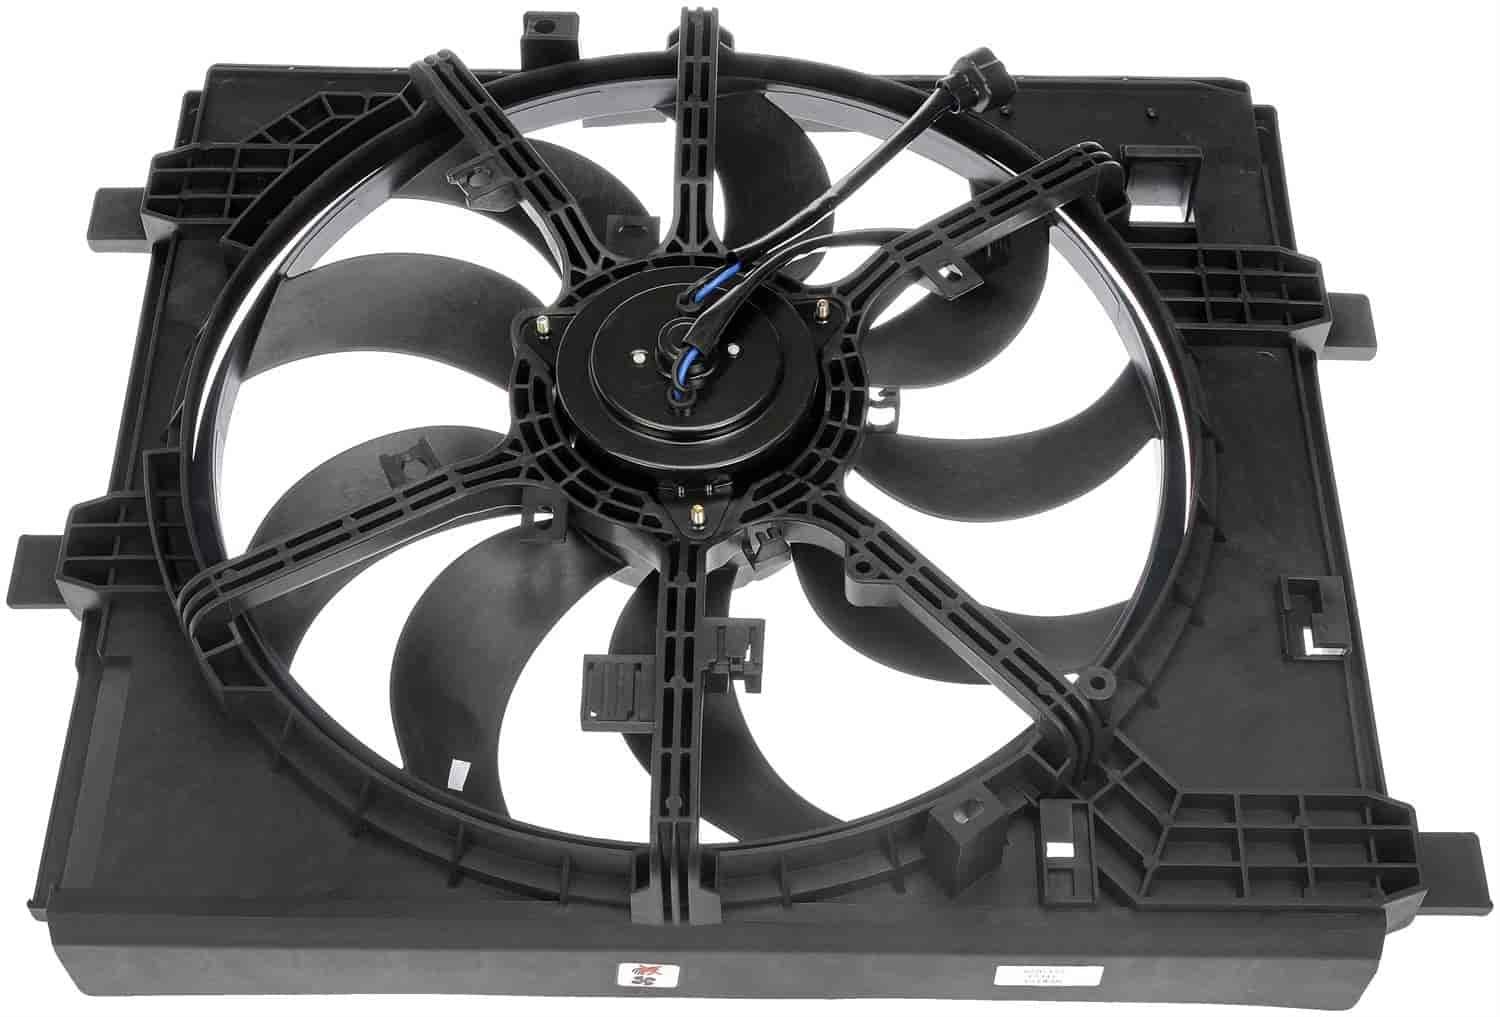 Single Fan Assembly without controller